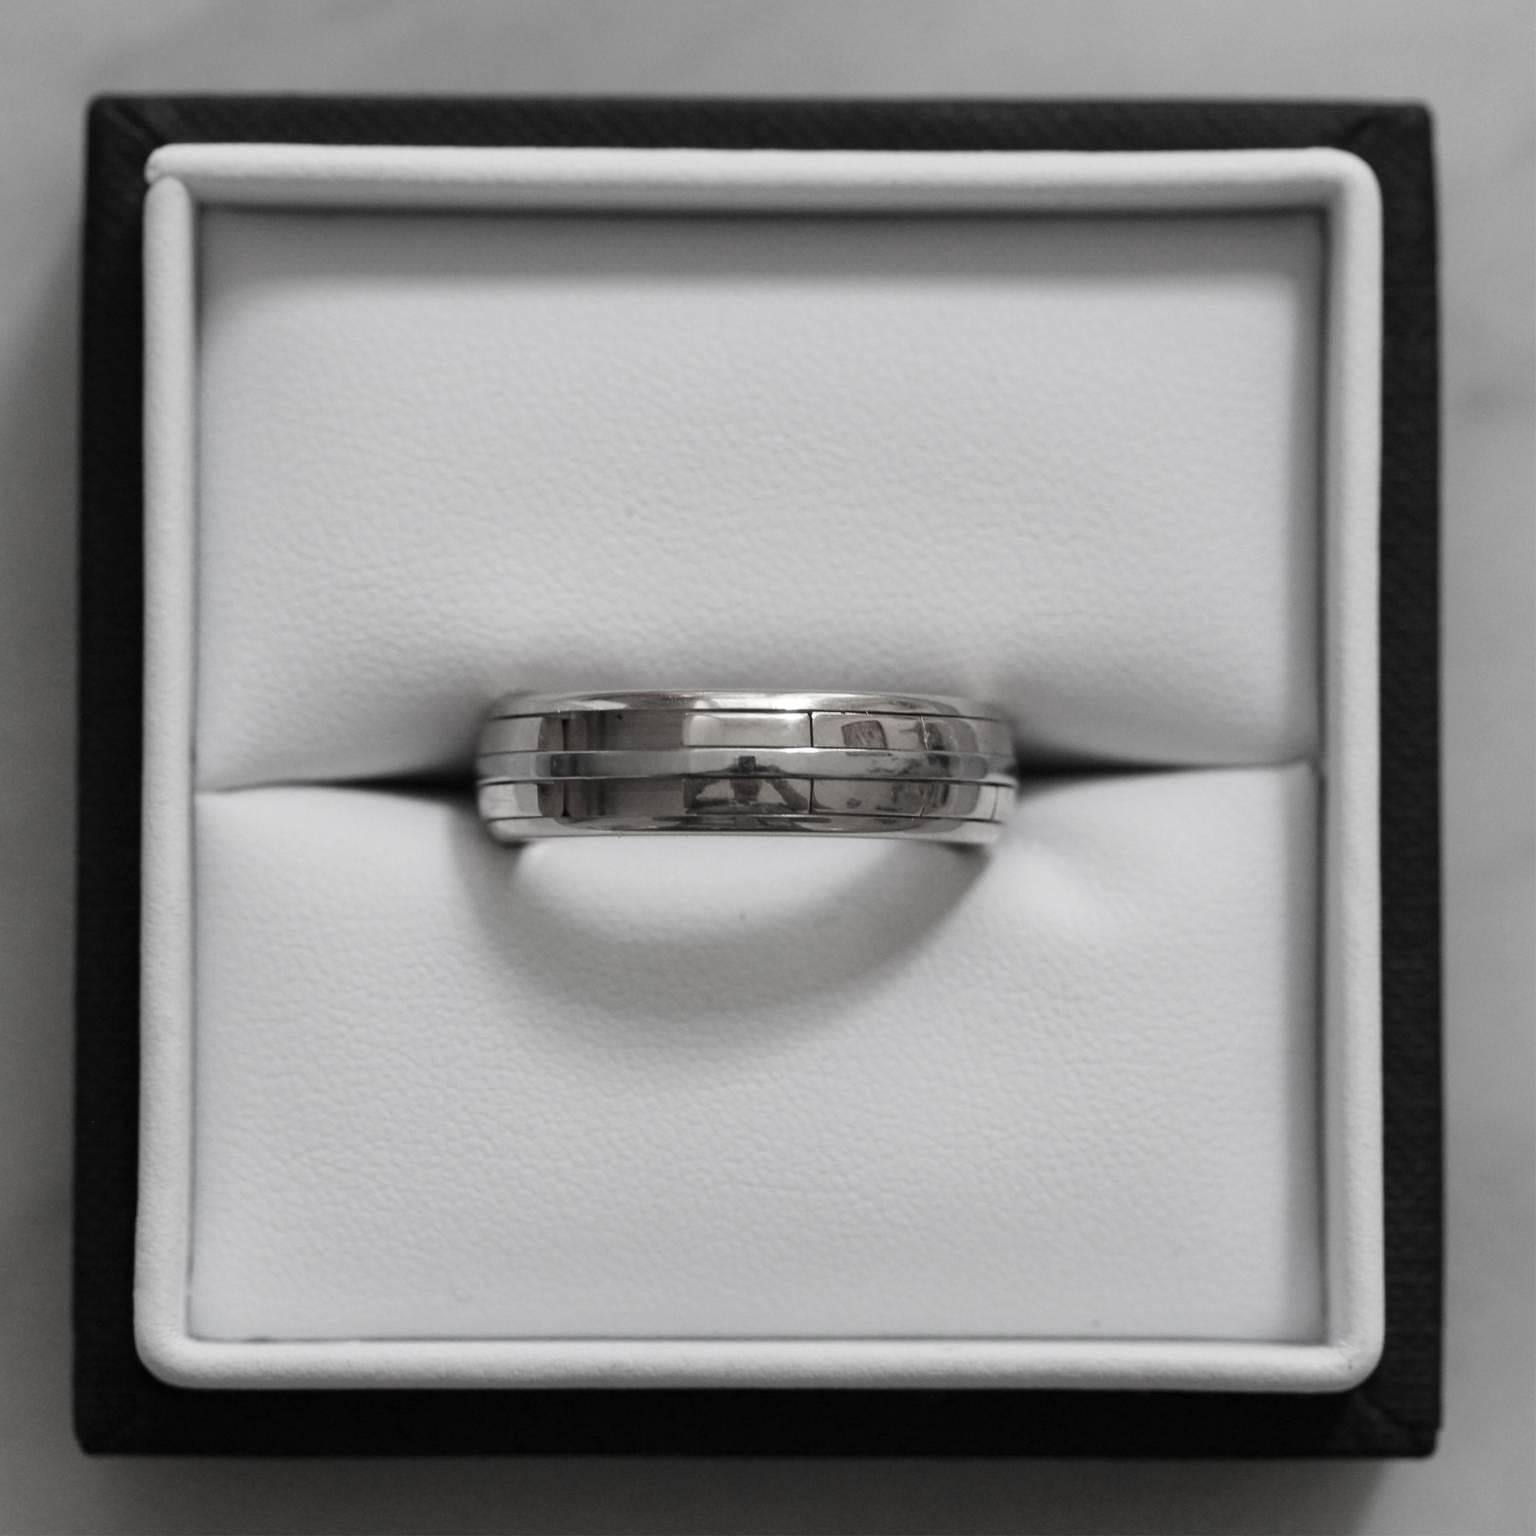 REVOLVER can be worn as a stunning dress ring but also works perfectly as a unique wedding ring for him and her.

12 individual sections rotate freely around the ring, held in place by a  fine Platinum central band.

The ring can be produced in any